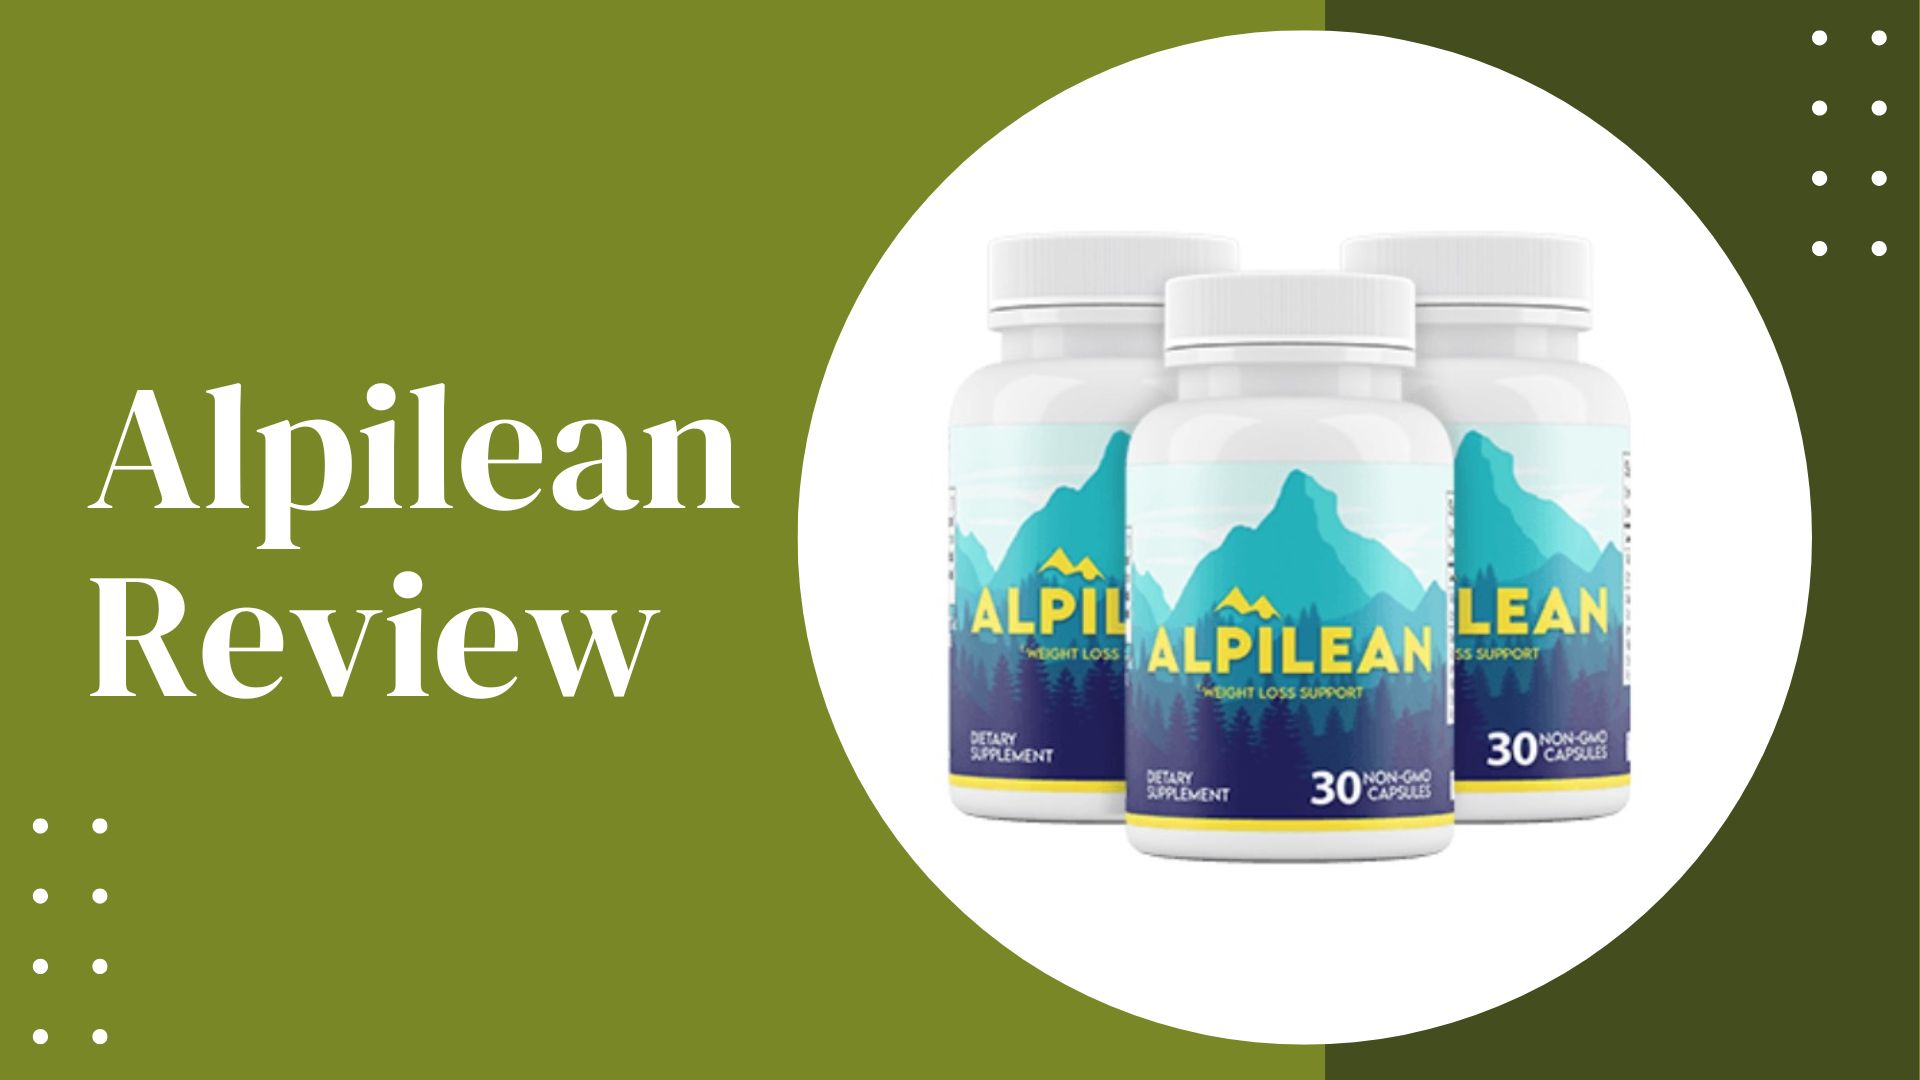 Alpilean Review: Know All About This Weight Loss Supplement